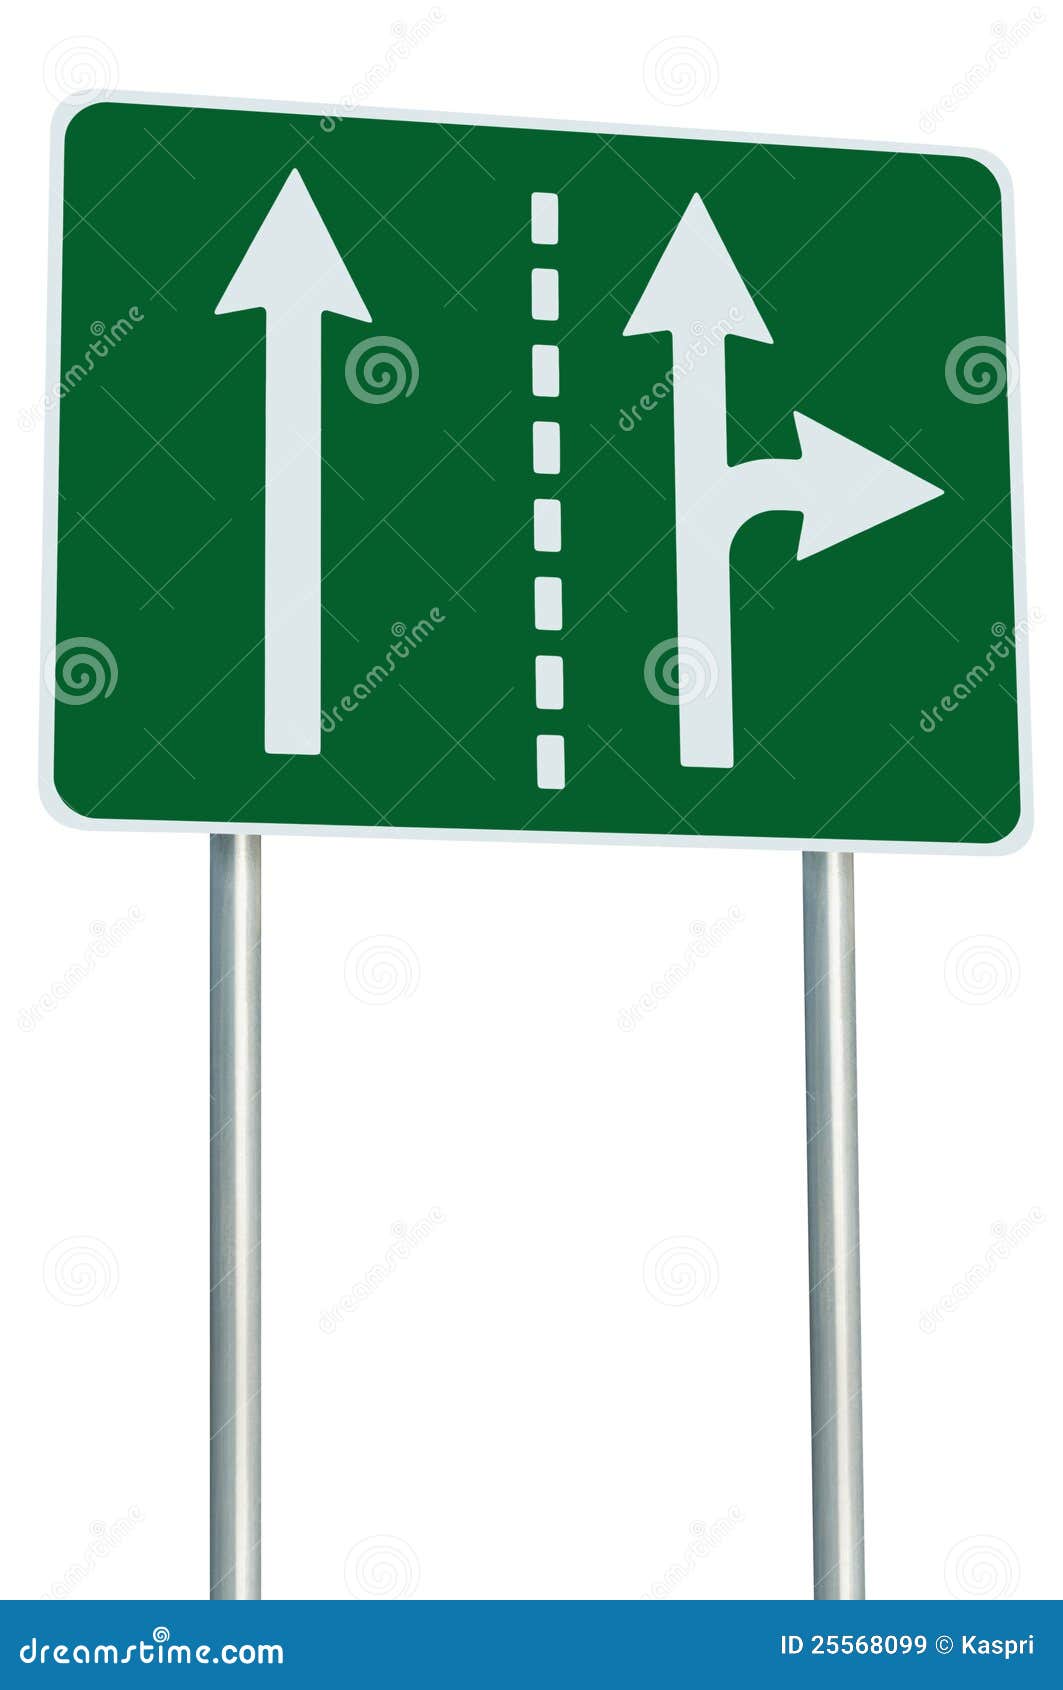 appropriate traffic lanes crossroads junction sign